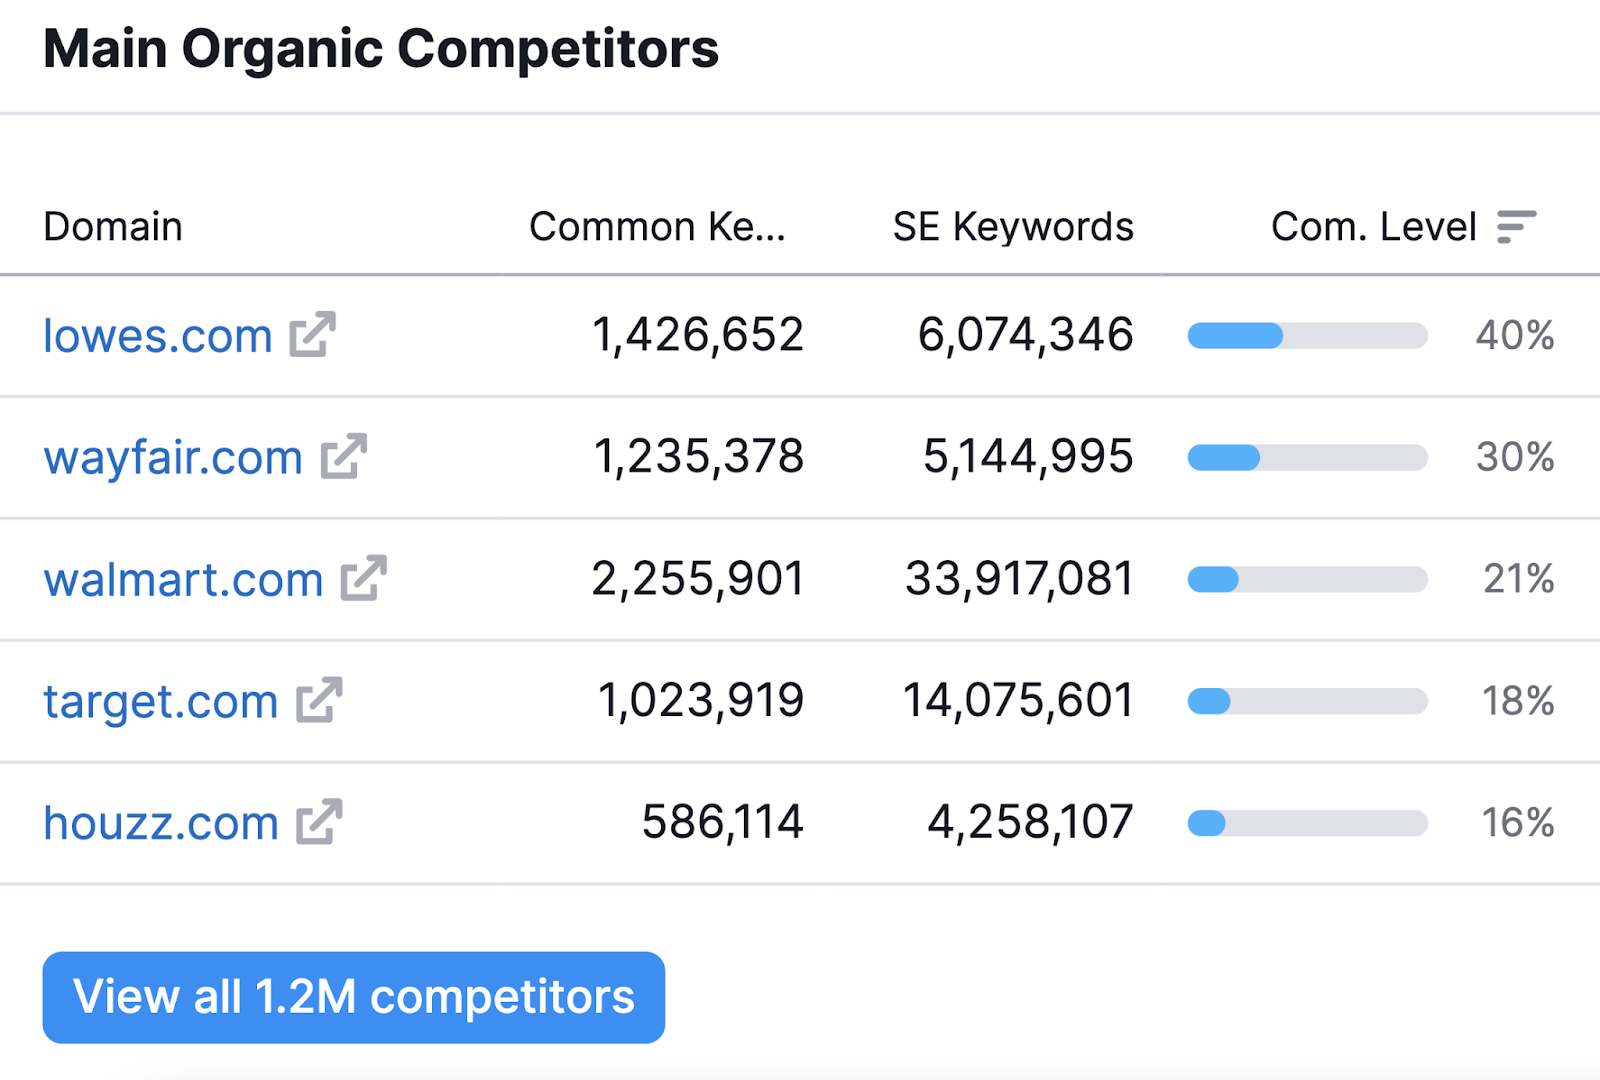 Main Organic Competitors section